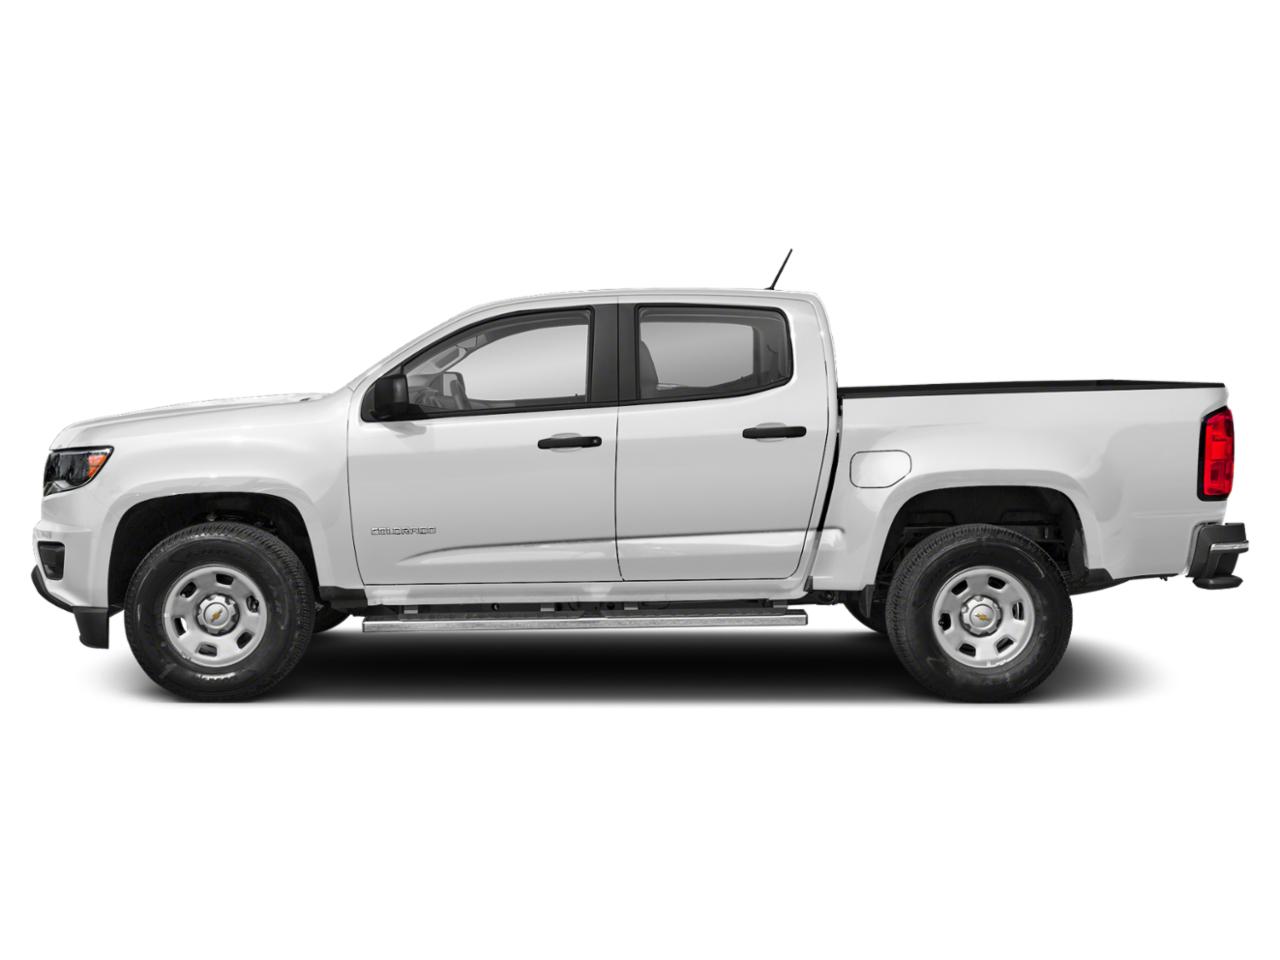 Certified Summit White 2019 Chevrolet Colorado for Sale in